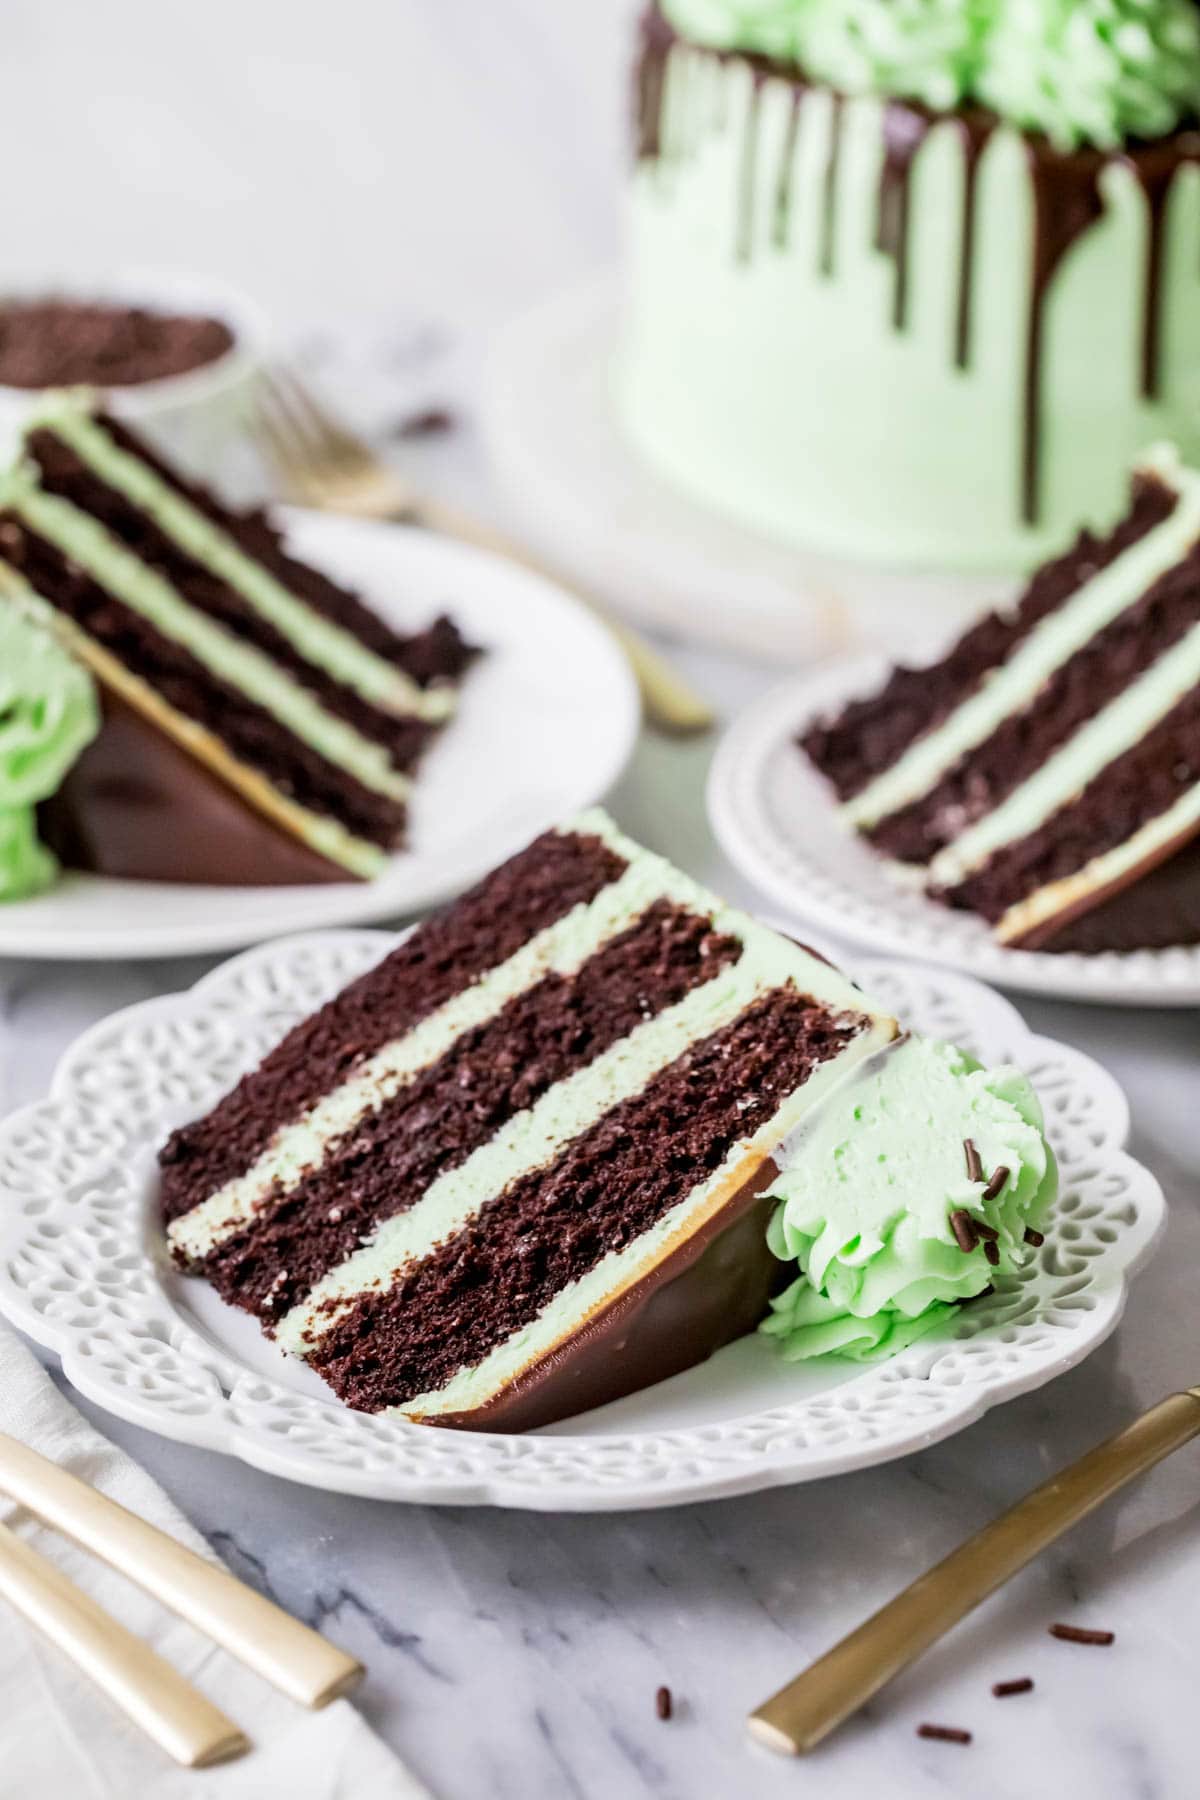 Slices of chocolate cake with mint frosting on white plates.